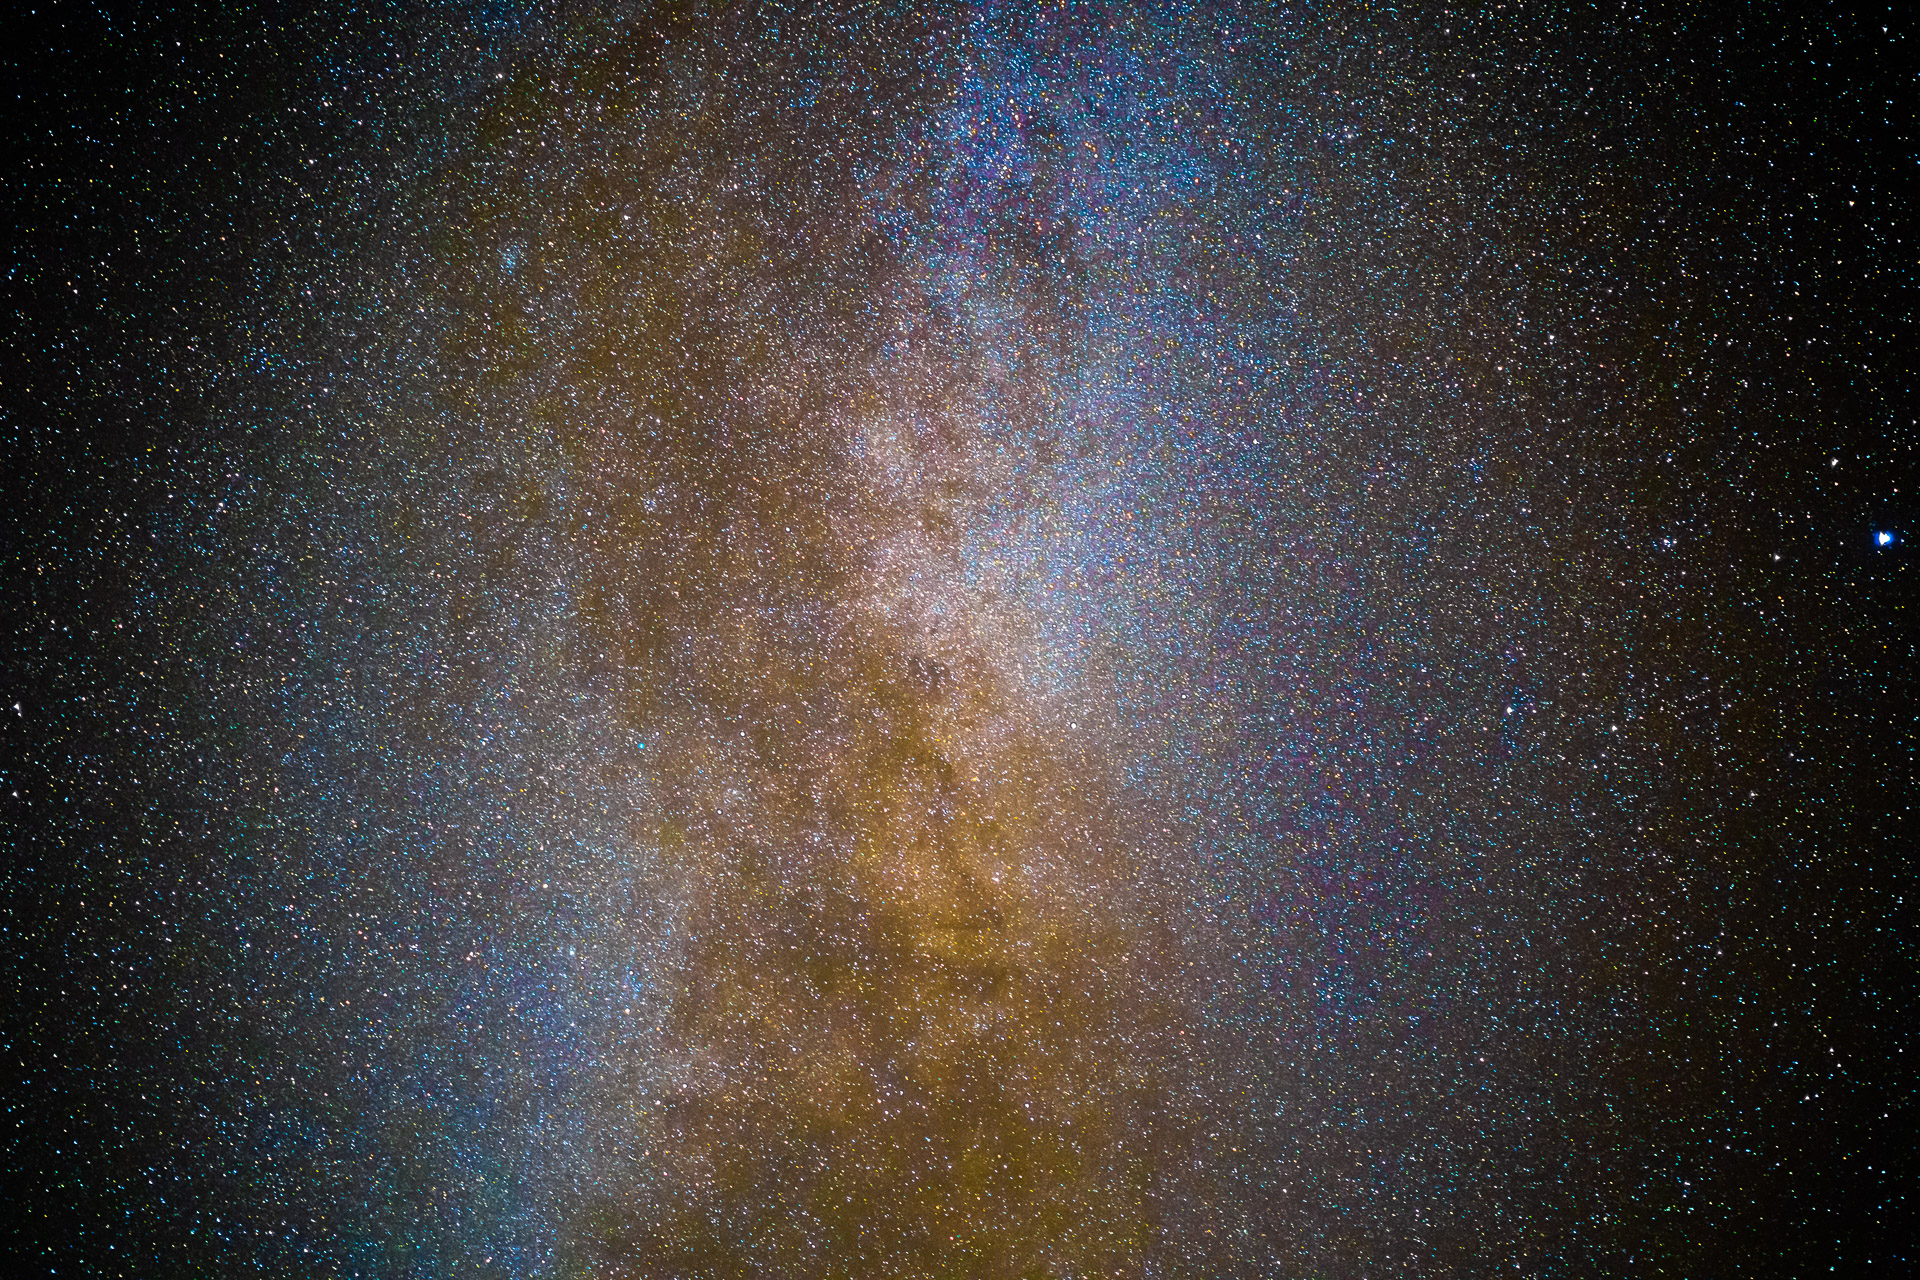 A part of the milky way